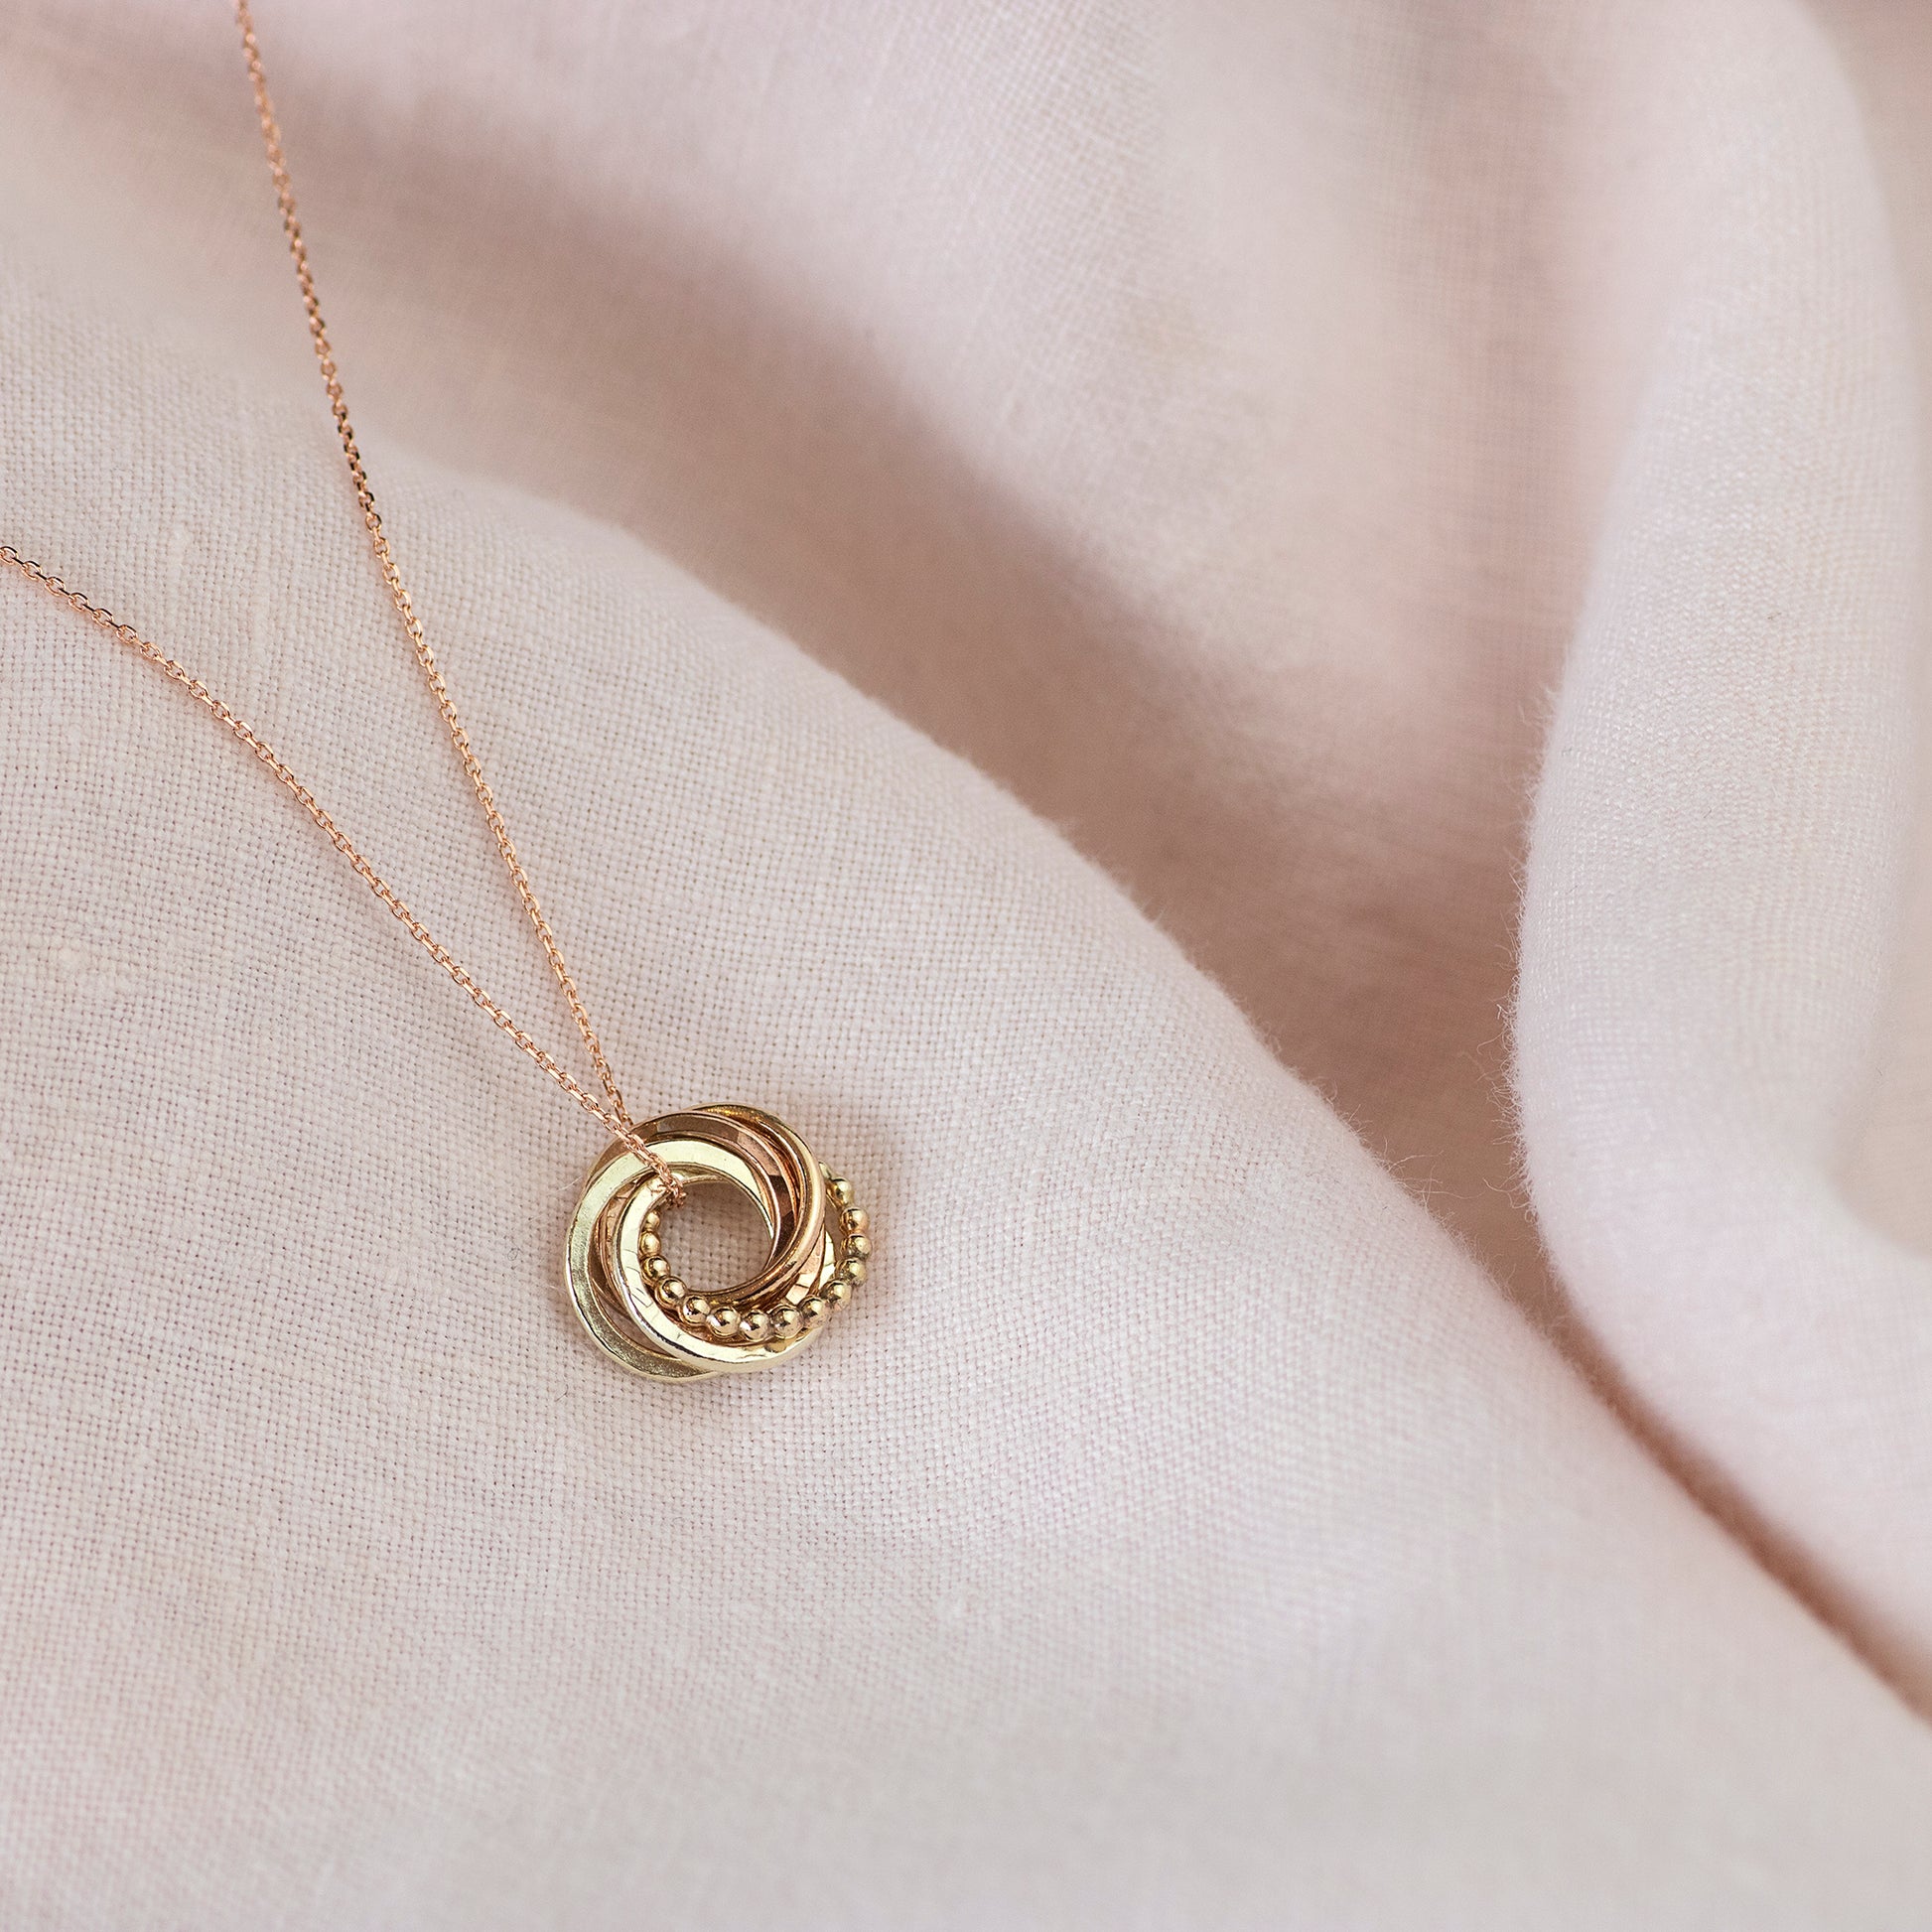 9kt Gold 6th Anniversary Love Knot Necklace -  The Original 6 Links for 6 Years Necklace - Recycled Gold, Rose Gold & Silver